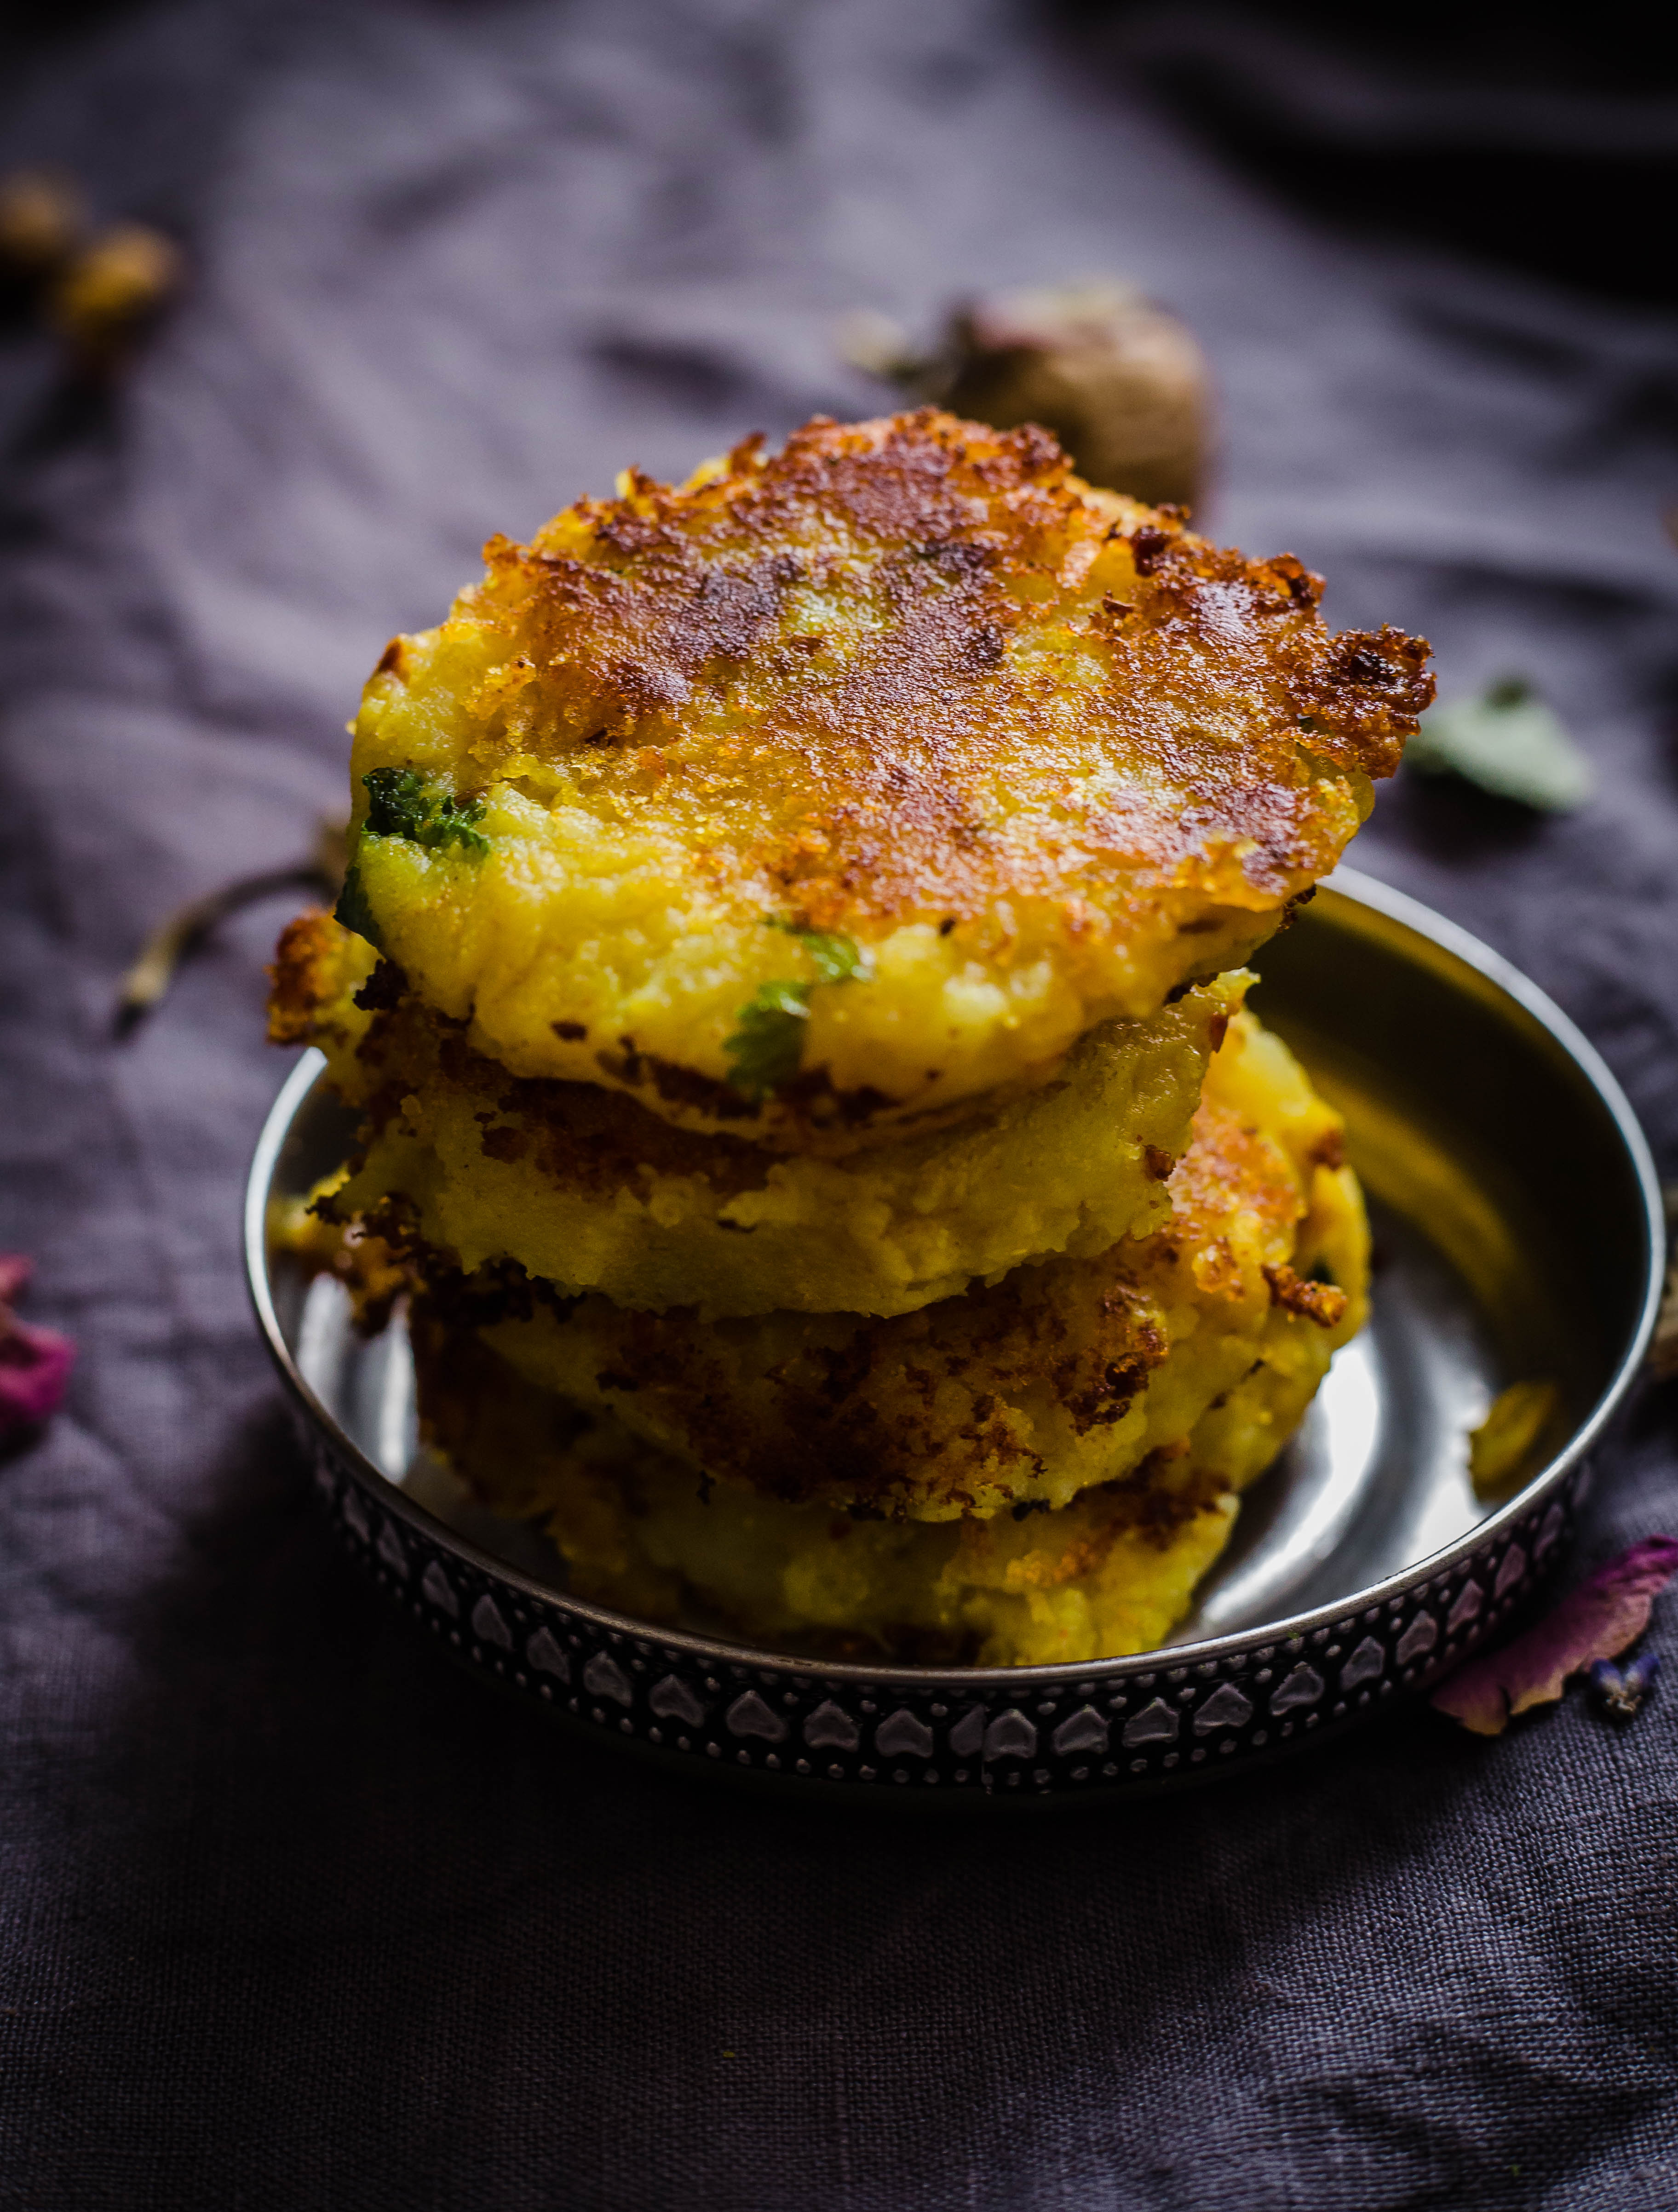 4 Aloo Tikkis on top of each other in a small silver lid on a grey towel with scattered dried flowers